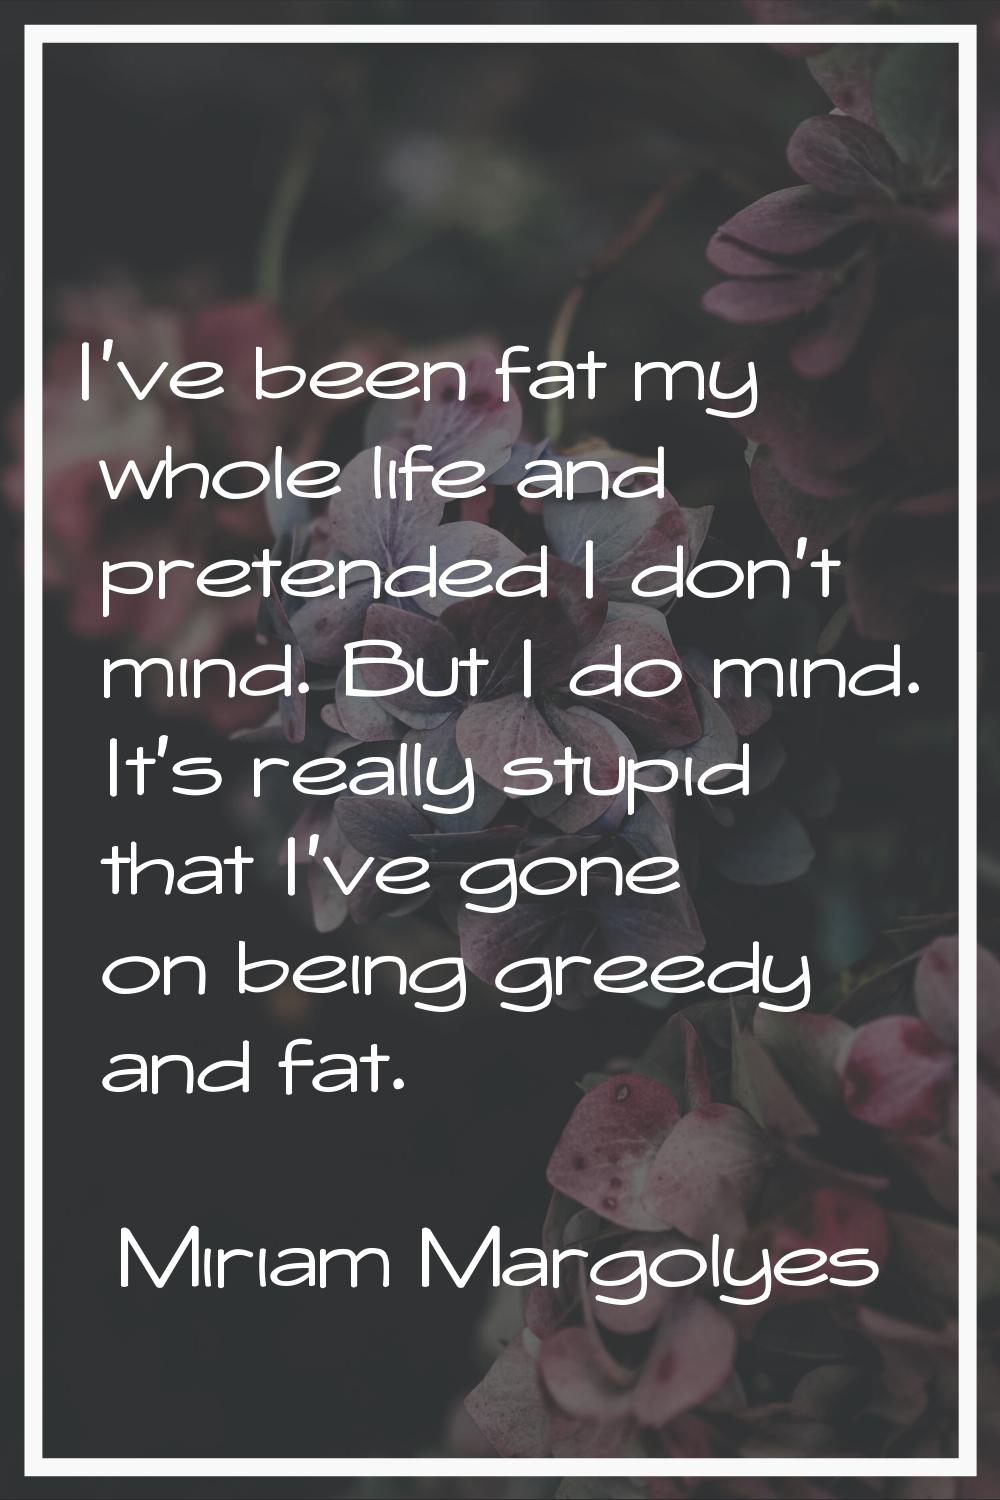 I've been fat my whole life and pretended I don't mind. But I do mind. It's really stupid that I've